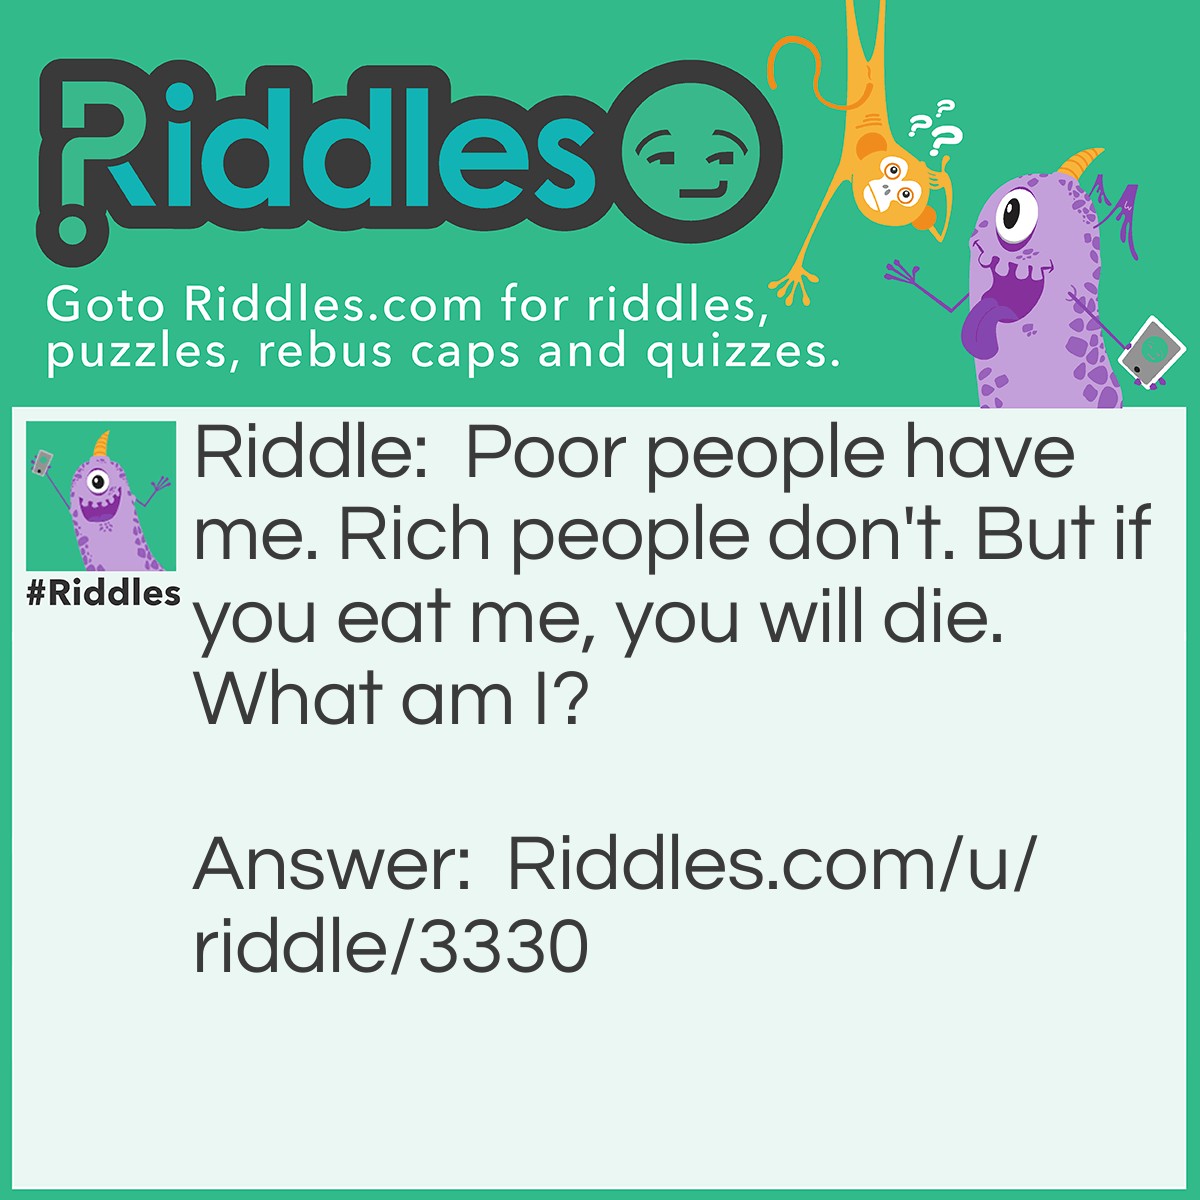 Riddle: Poor people have me. Rich people don't. But if you eat me, you will die. What am I? Answer: Nothing.